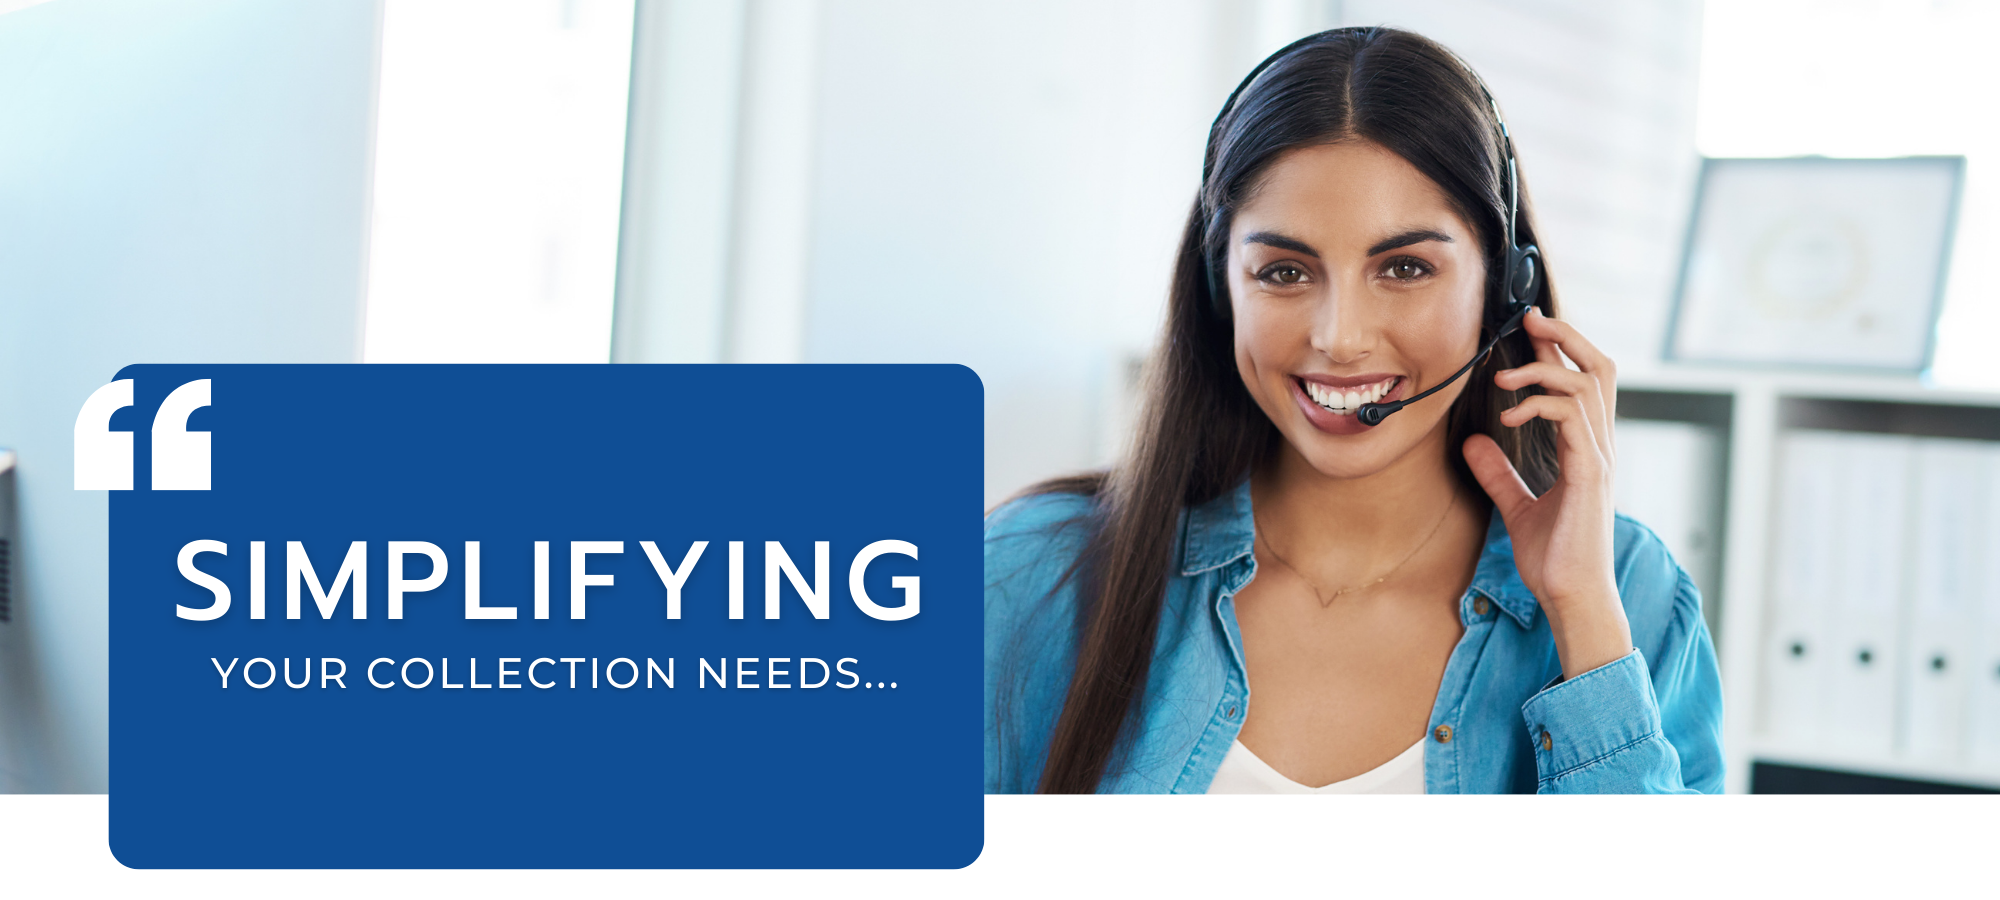 woman with headset in customer service